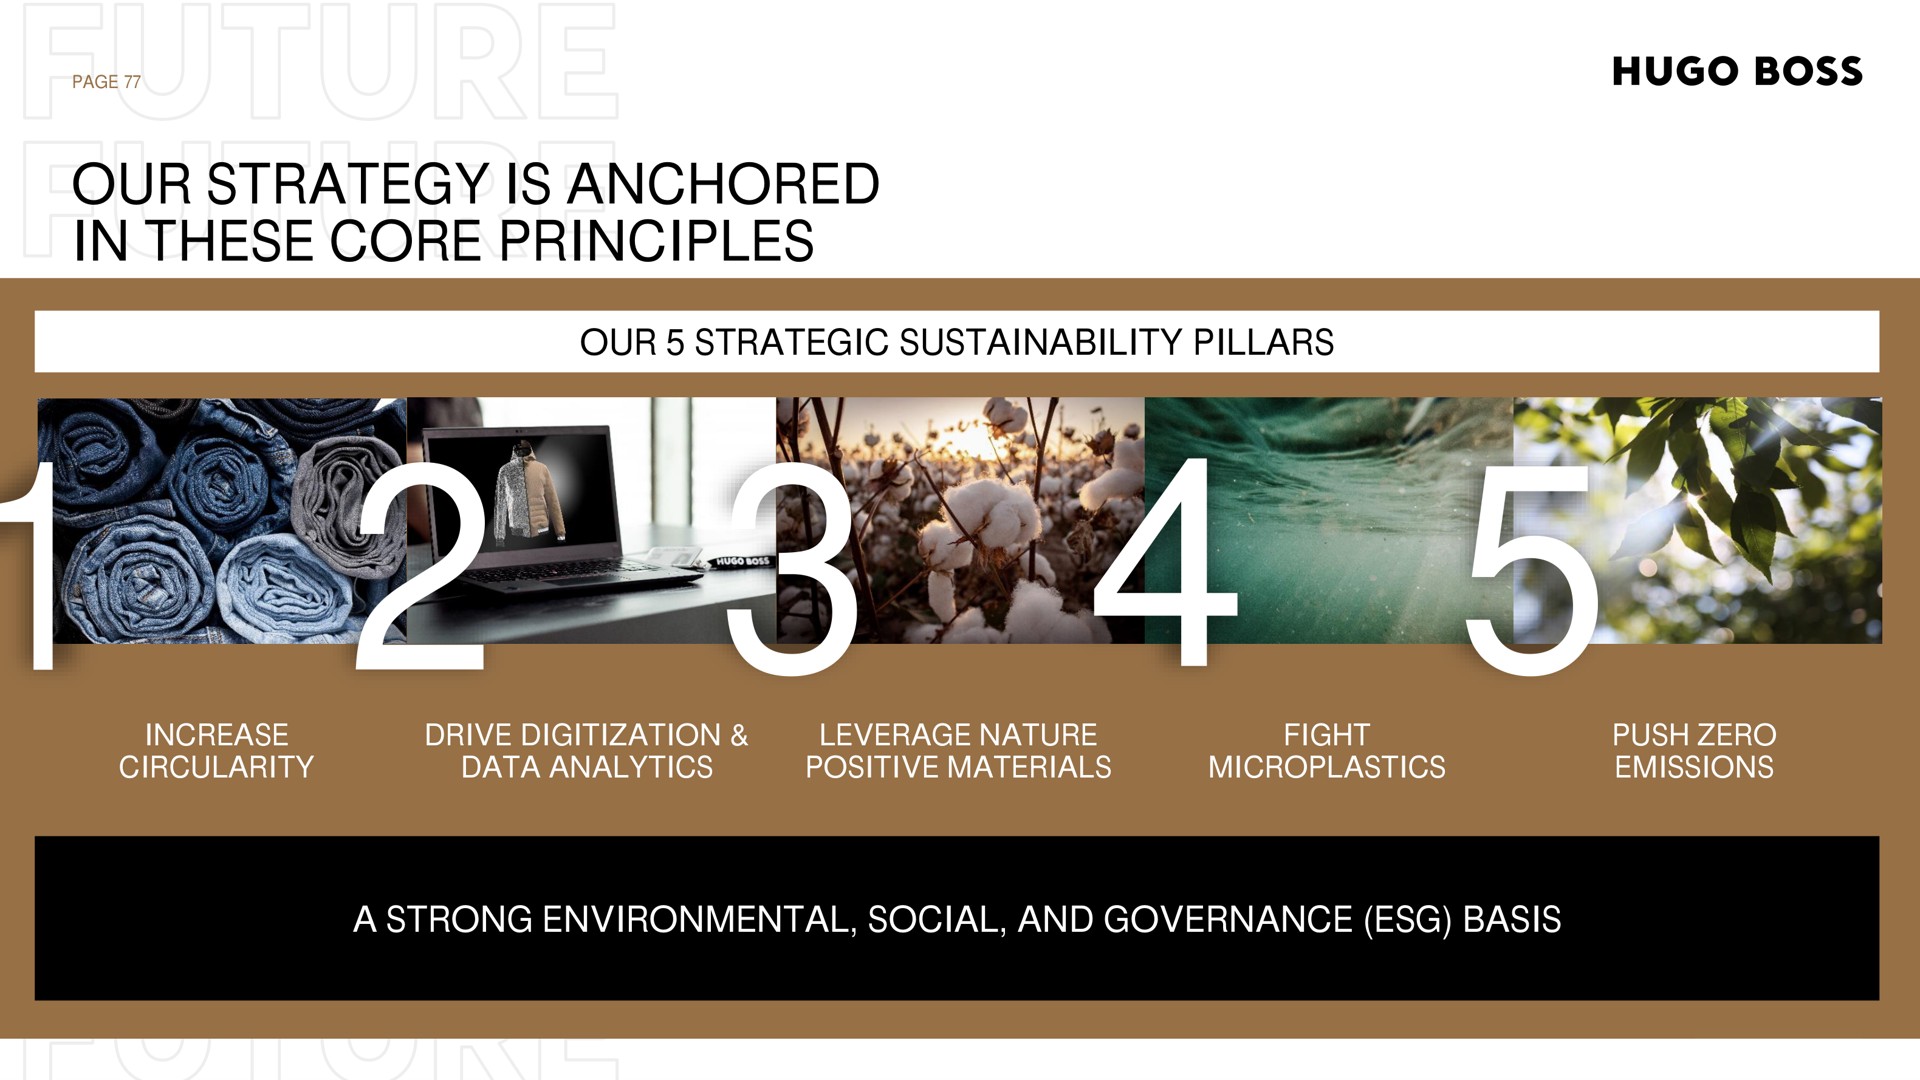 our strategy is anchored in these core principles page boss strategic pillars a strong environmental social and governance basis | Hugo Boss